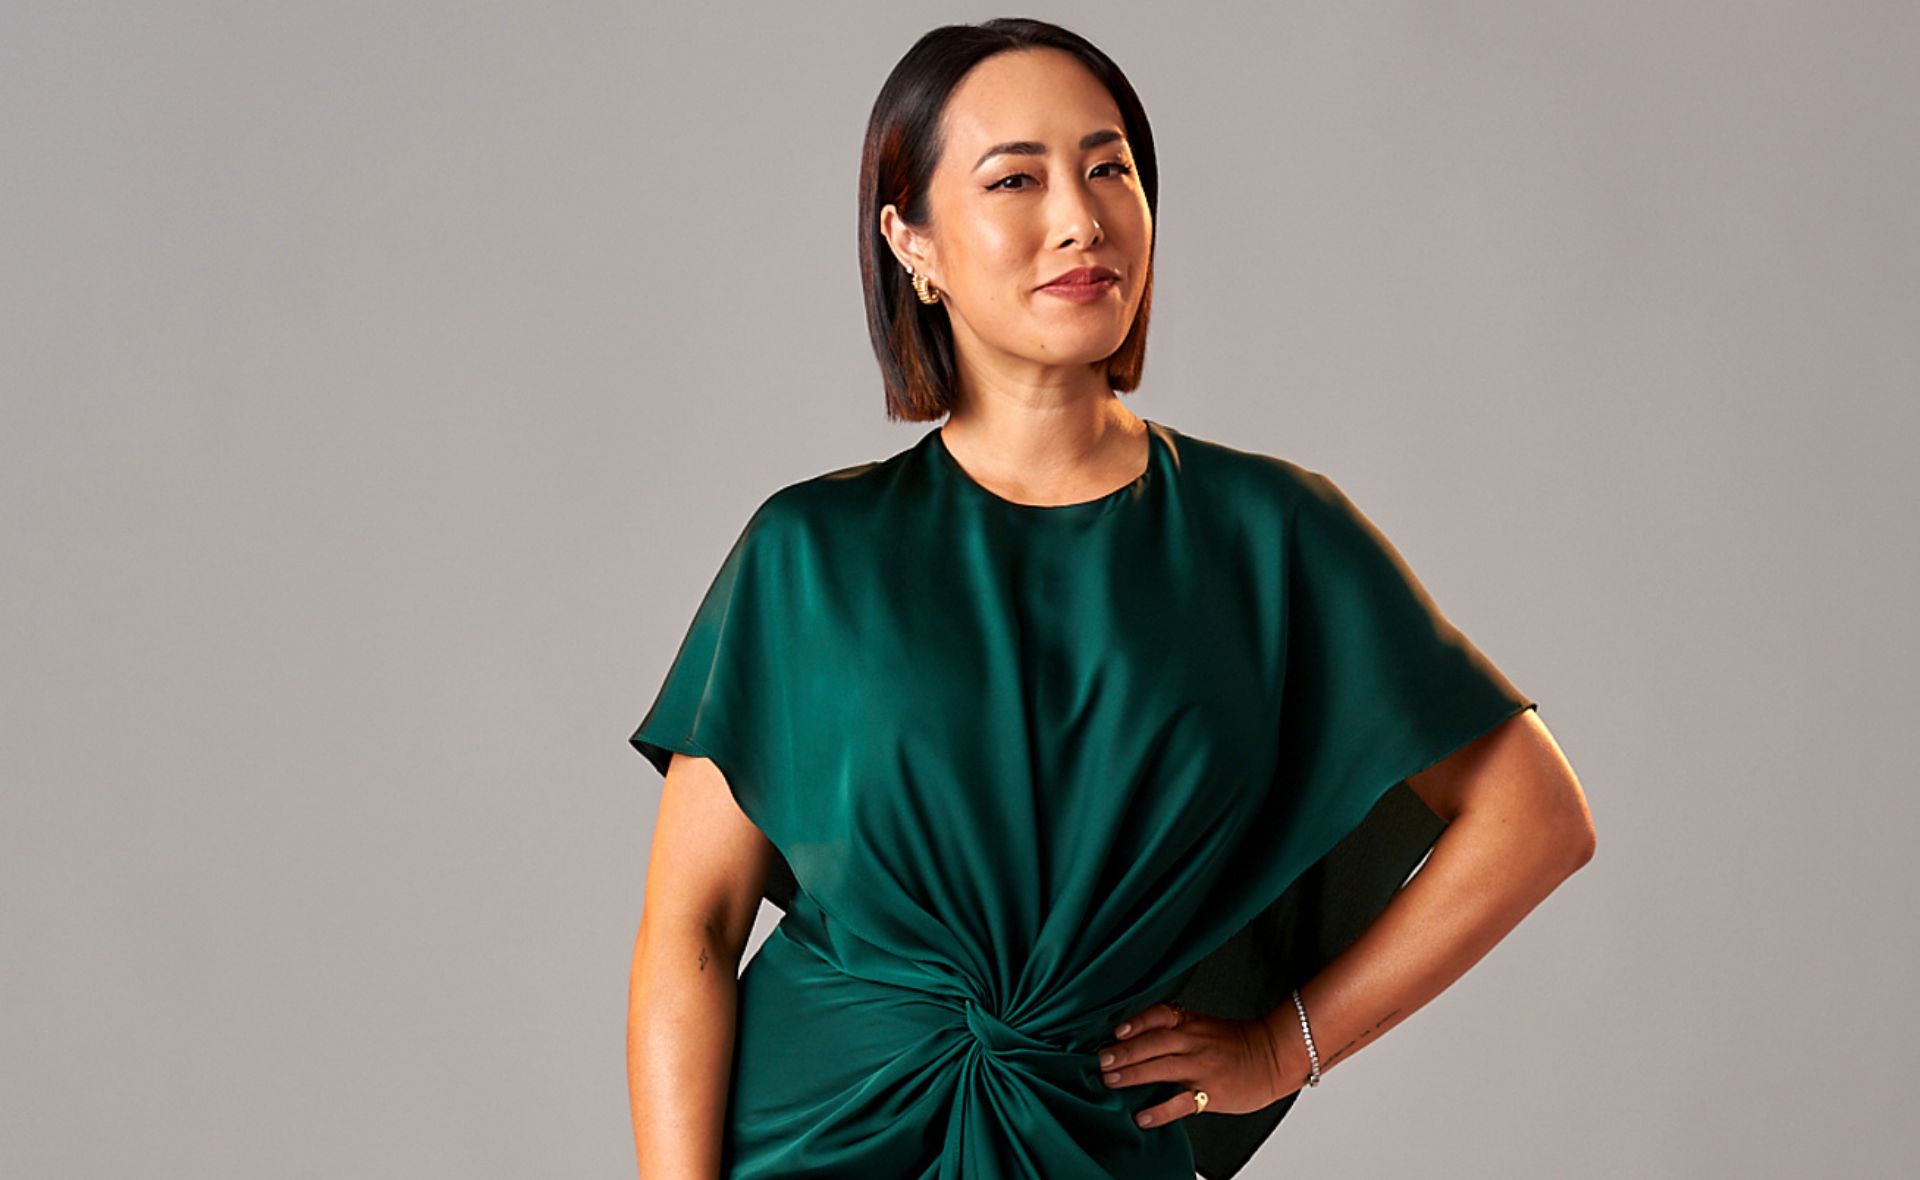 Co-host of new reality show Dessert Masters, Melissa Leong talks childhood dreams, privacy – and French accents